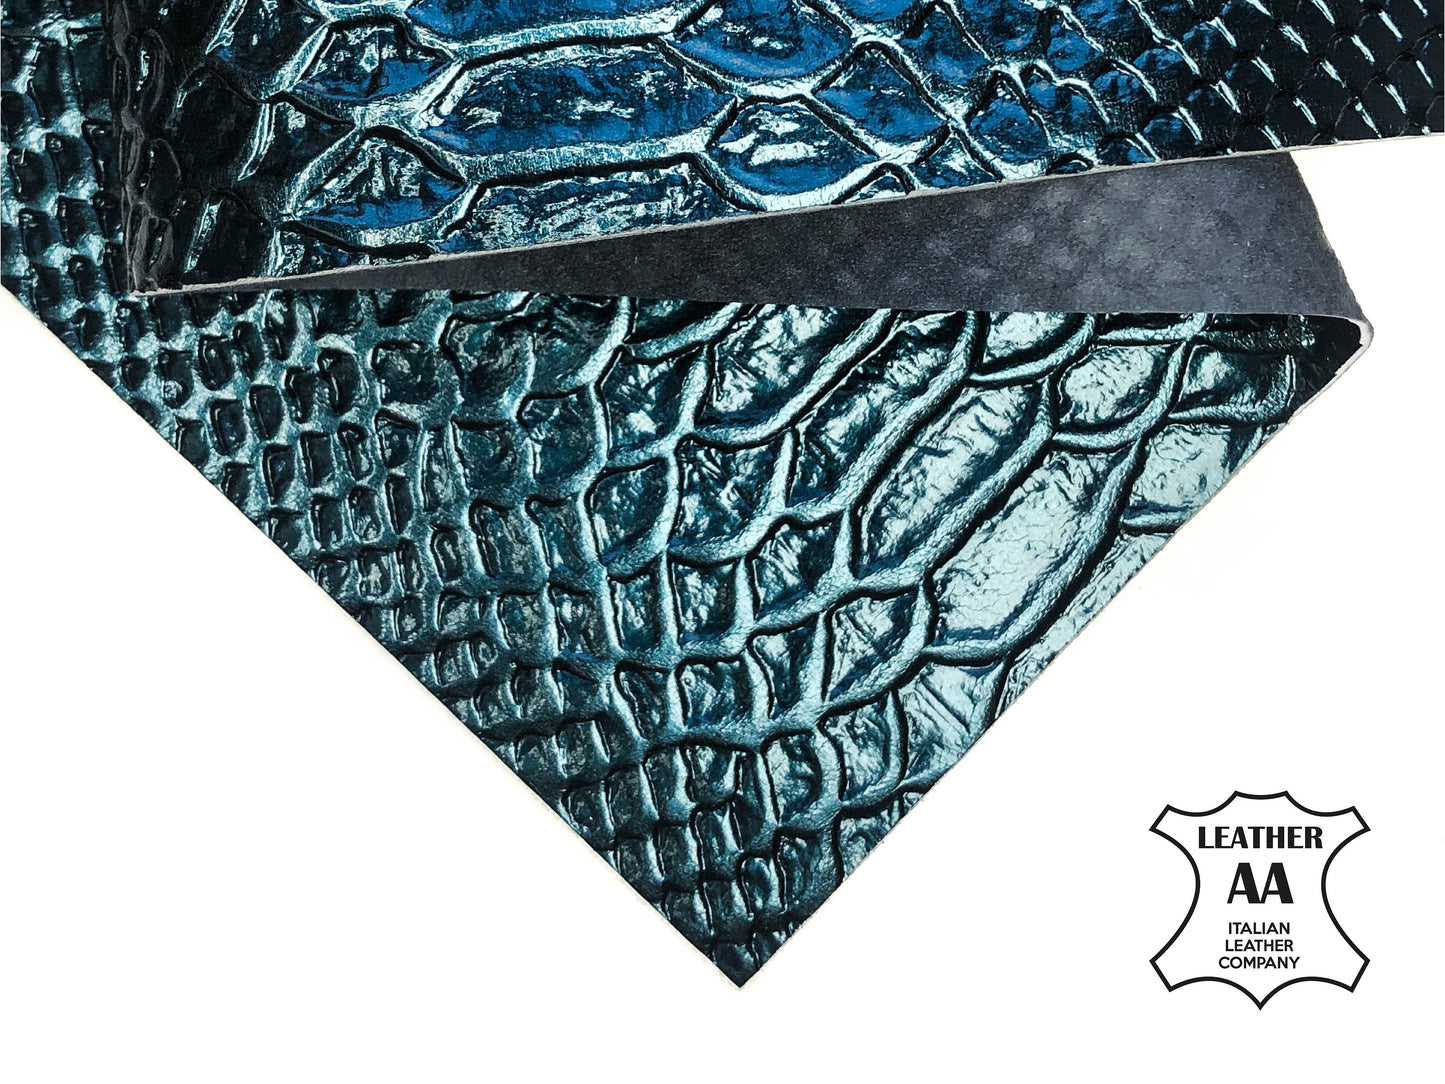 Teal Lambskin Sheets With Print 0.7mm/1.75oz / TEAL SNAKE 1021